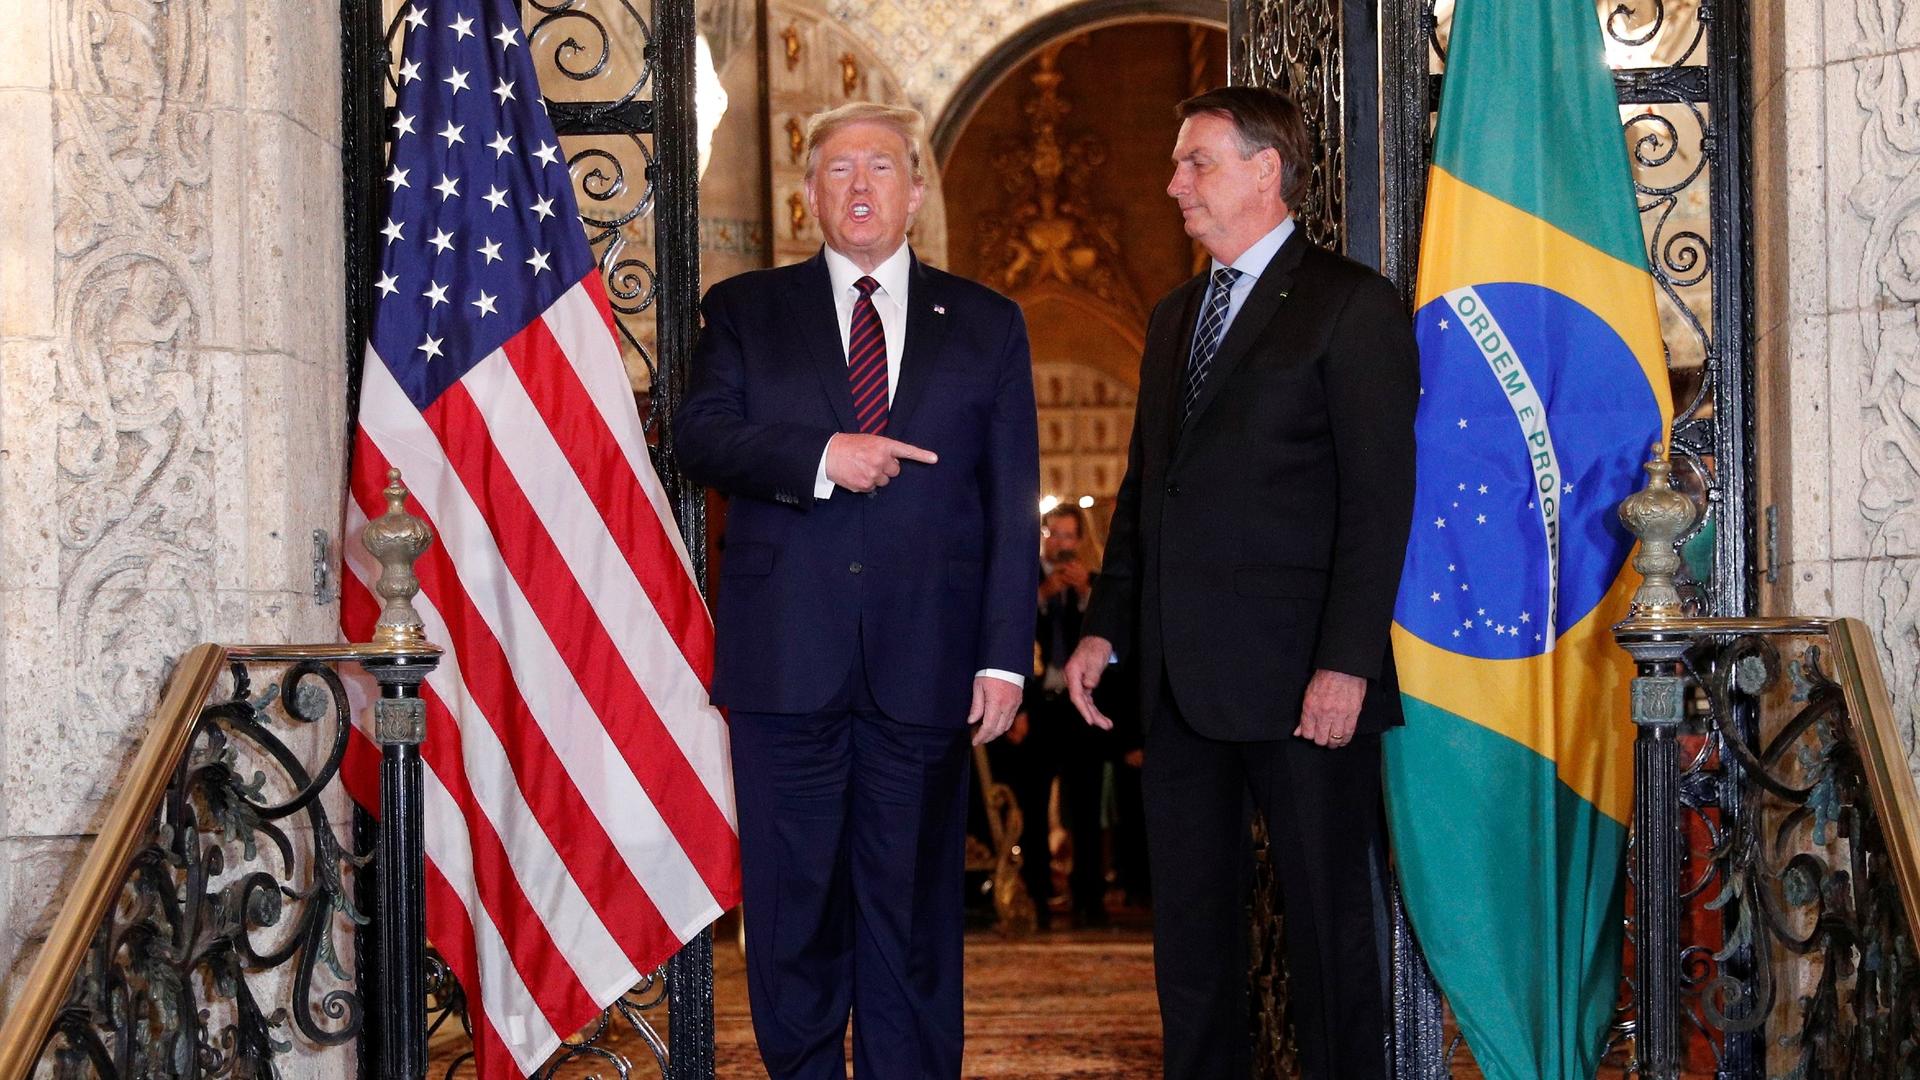 US President Donald Trump points at Brazilian President Jair Bolsonaro before attending a working dinner at the Mar-a-Lago resort in Palm Beach, Florida, March 7, 2020.